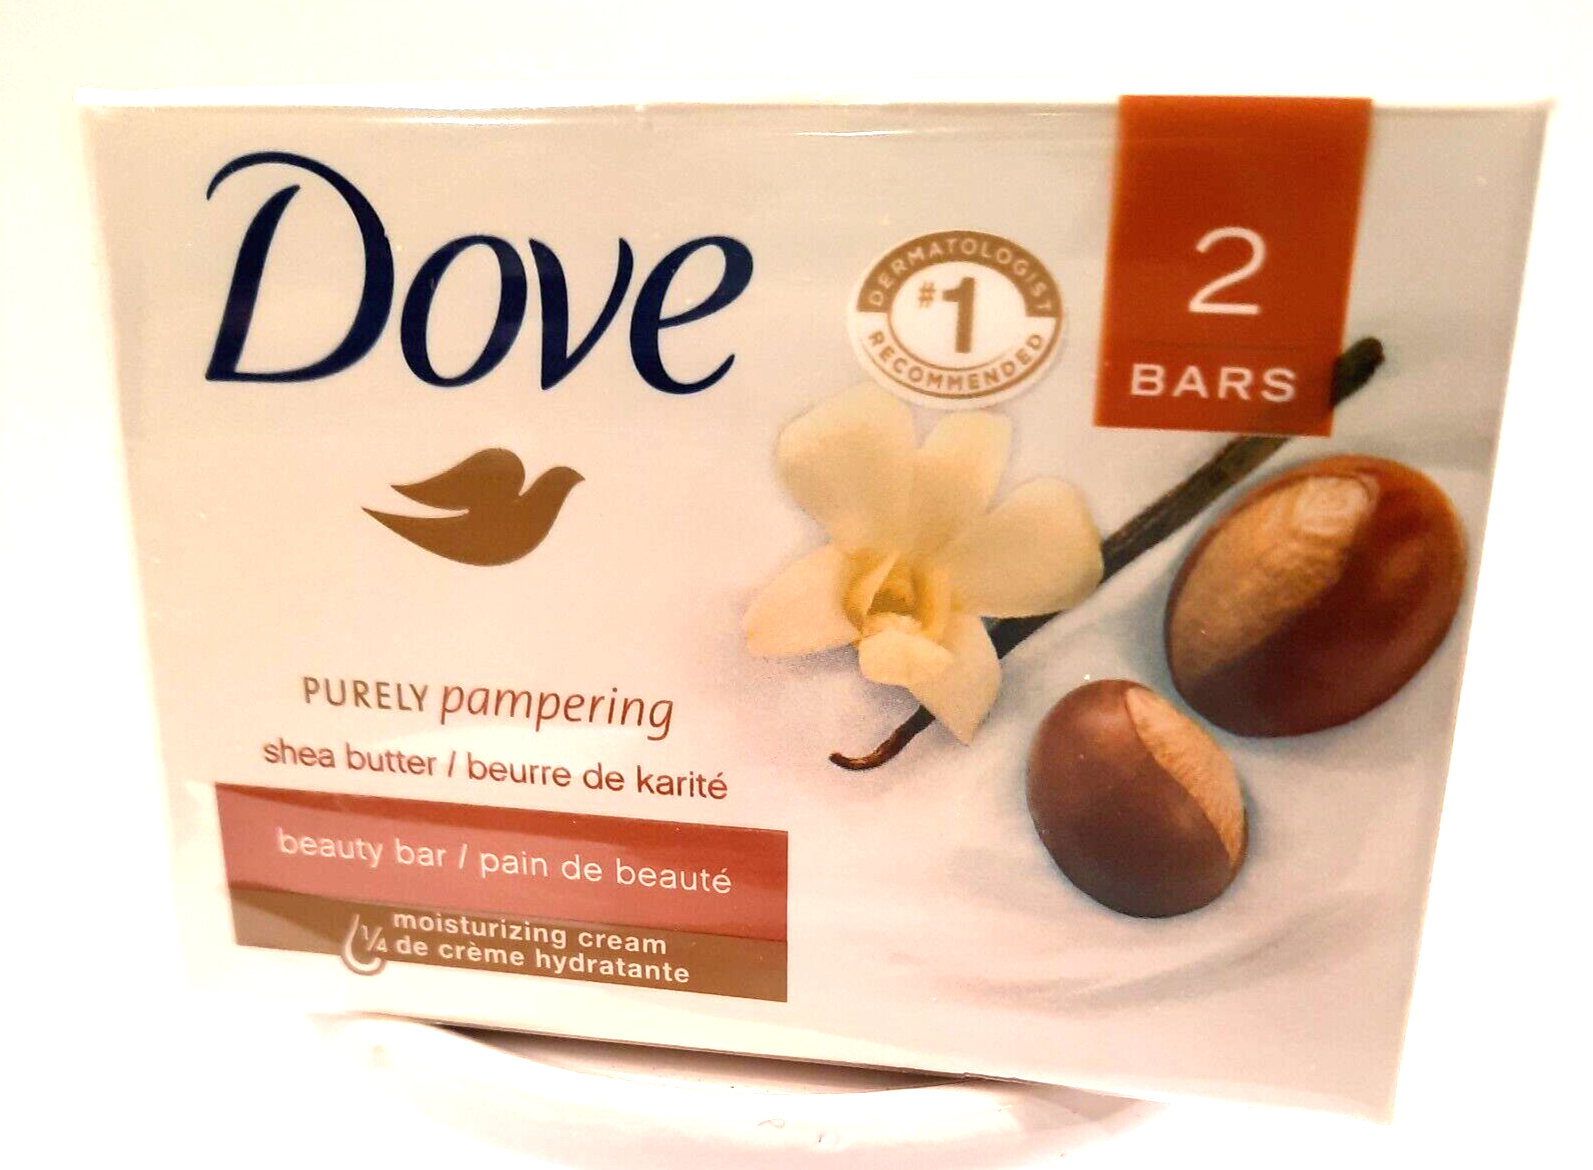 Dove Purely Pampering Shea Butter Beauty Bar, 4 oz, 2 Bar Pack 8 oz total - $7.24